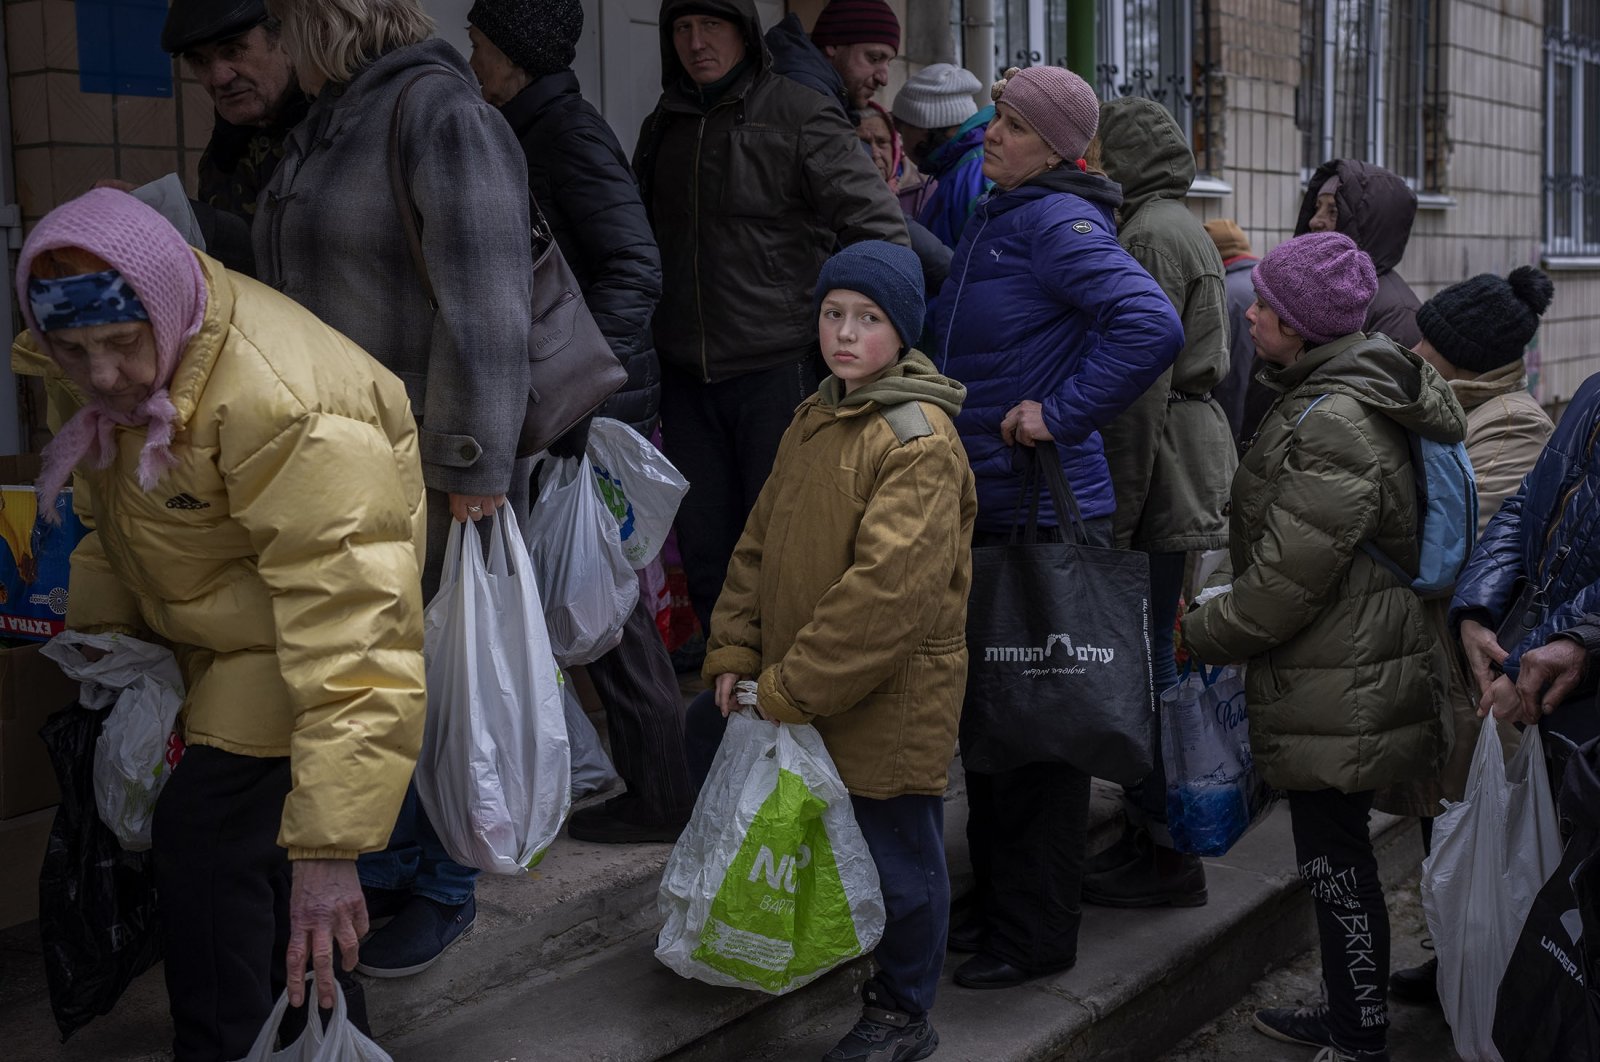 Sergei, 11, waits for his turn to receive donated food during an aid humanitarian distribution in Bucha, in the outskirts of Kyiv, Ukraine, April 19, 2022. (AP Photo)